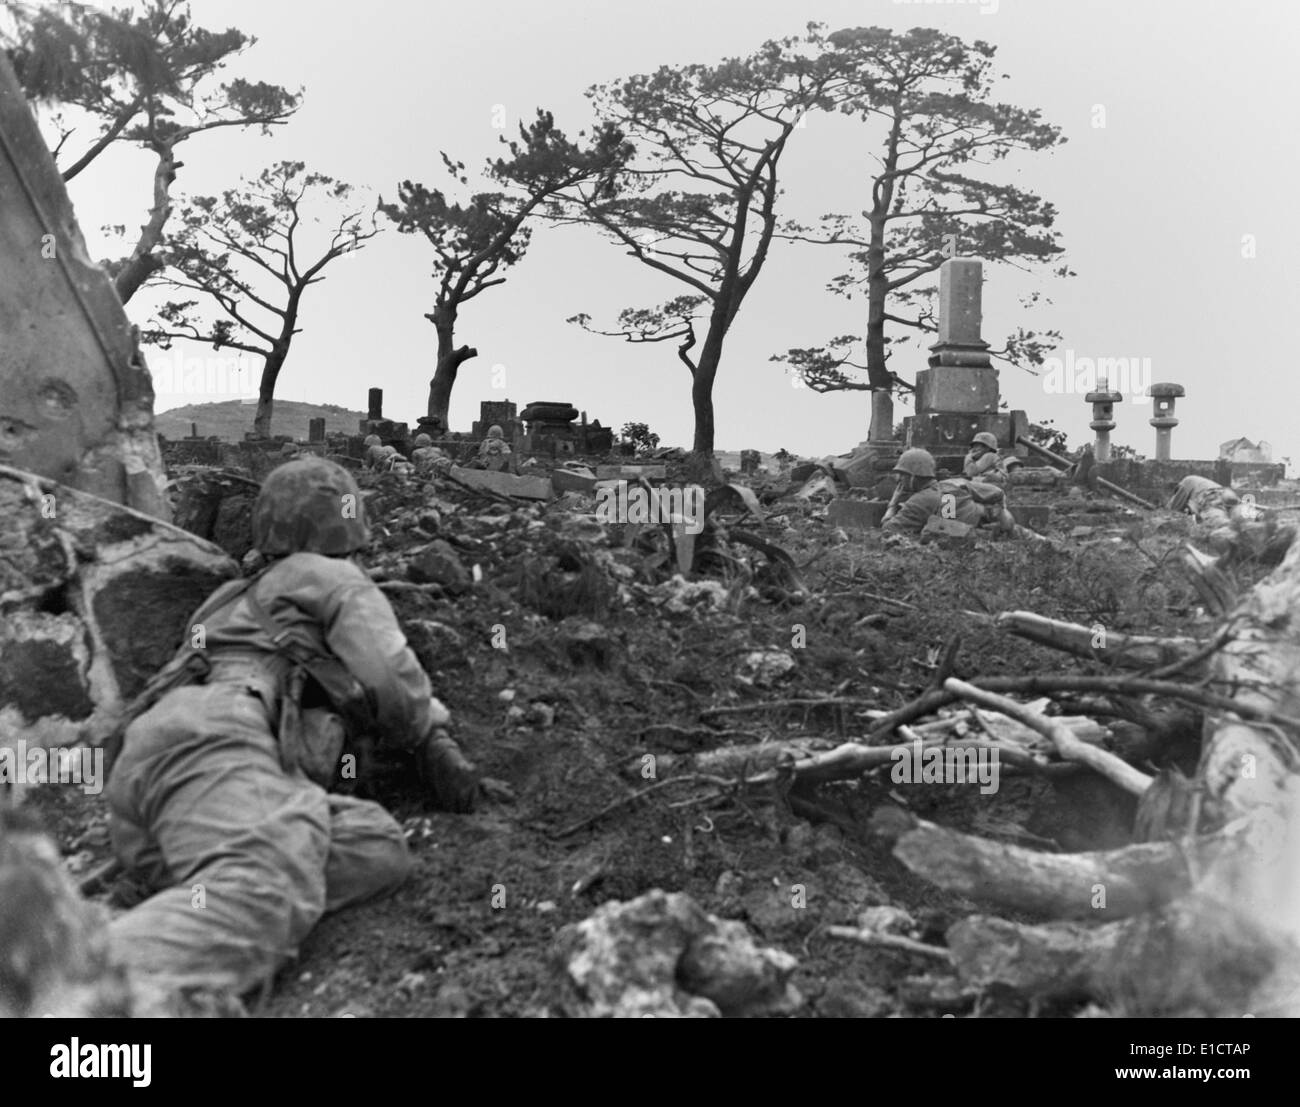 Marines pinned down behind gravestones by Japanese snipers during the Battle of Okinawa. June 1, 1945. World War 2. Stock Photo